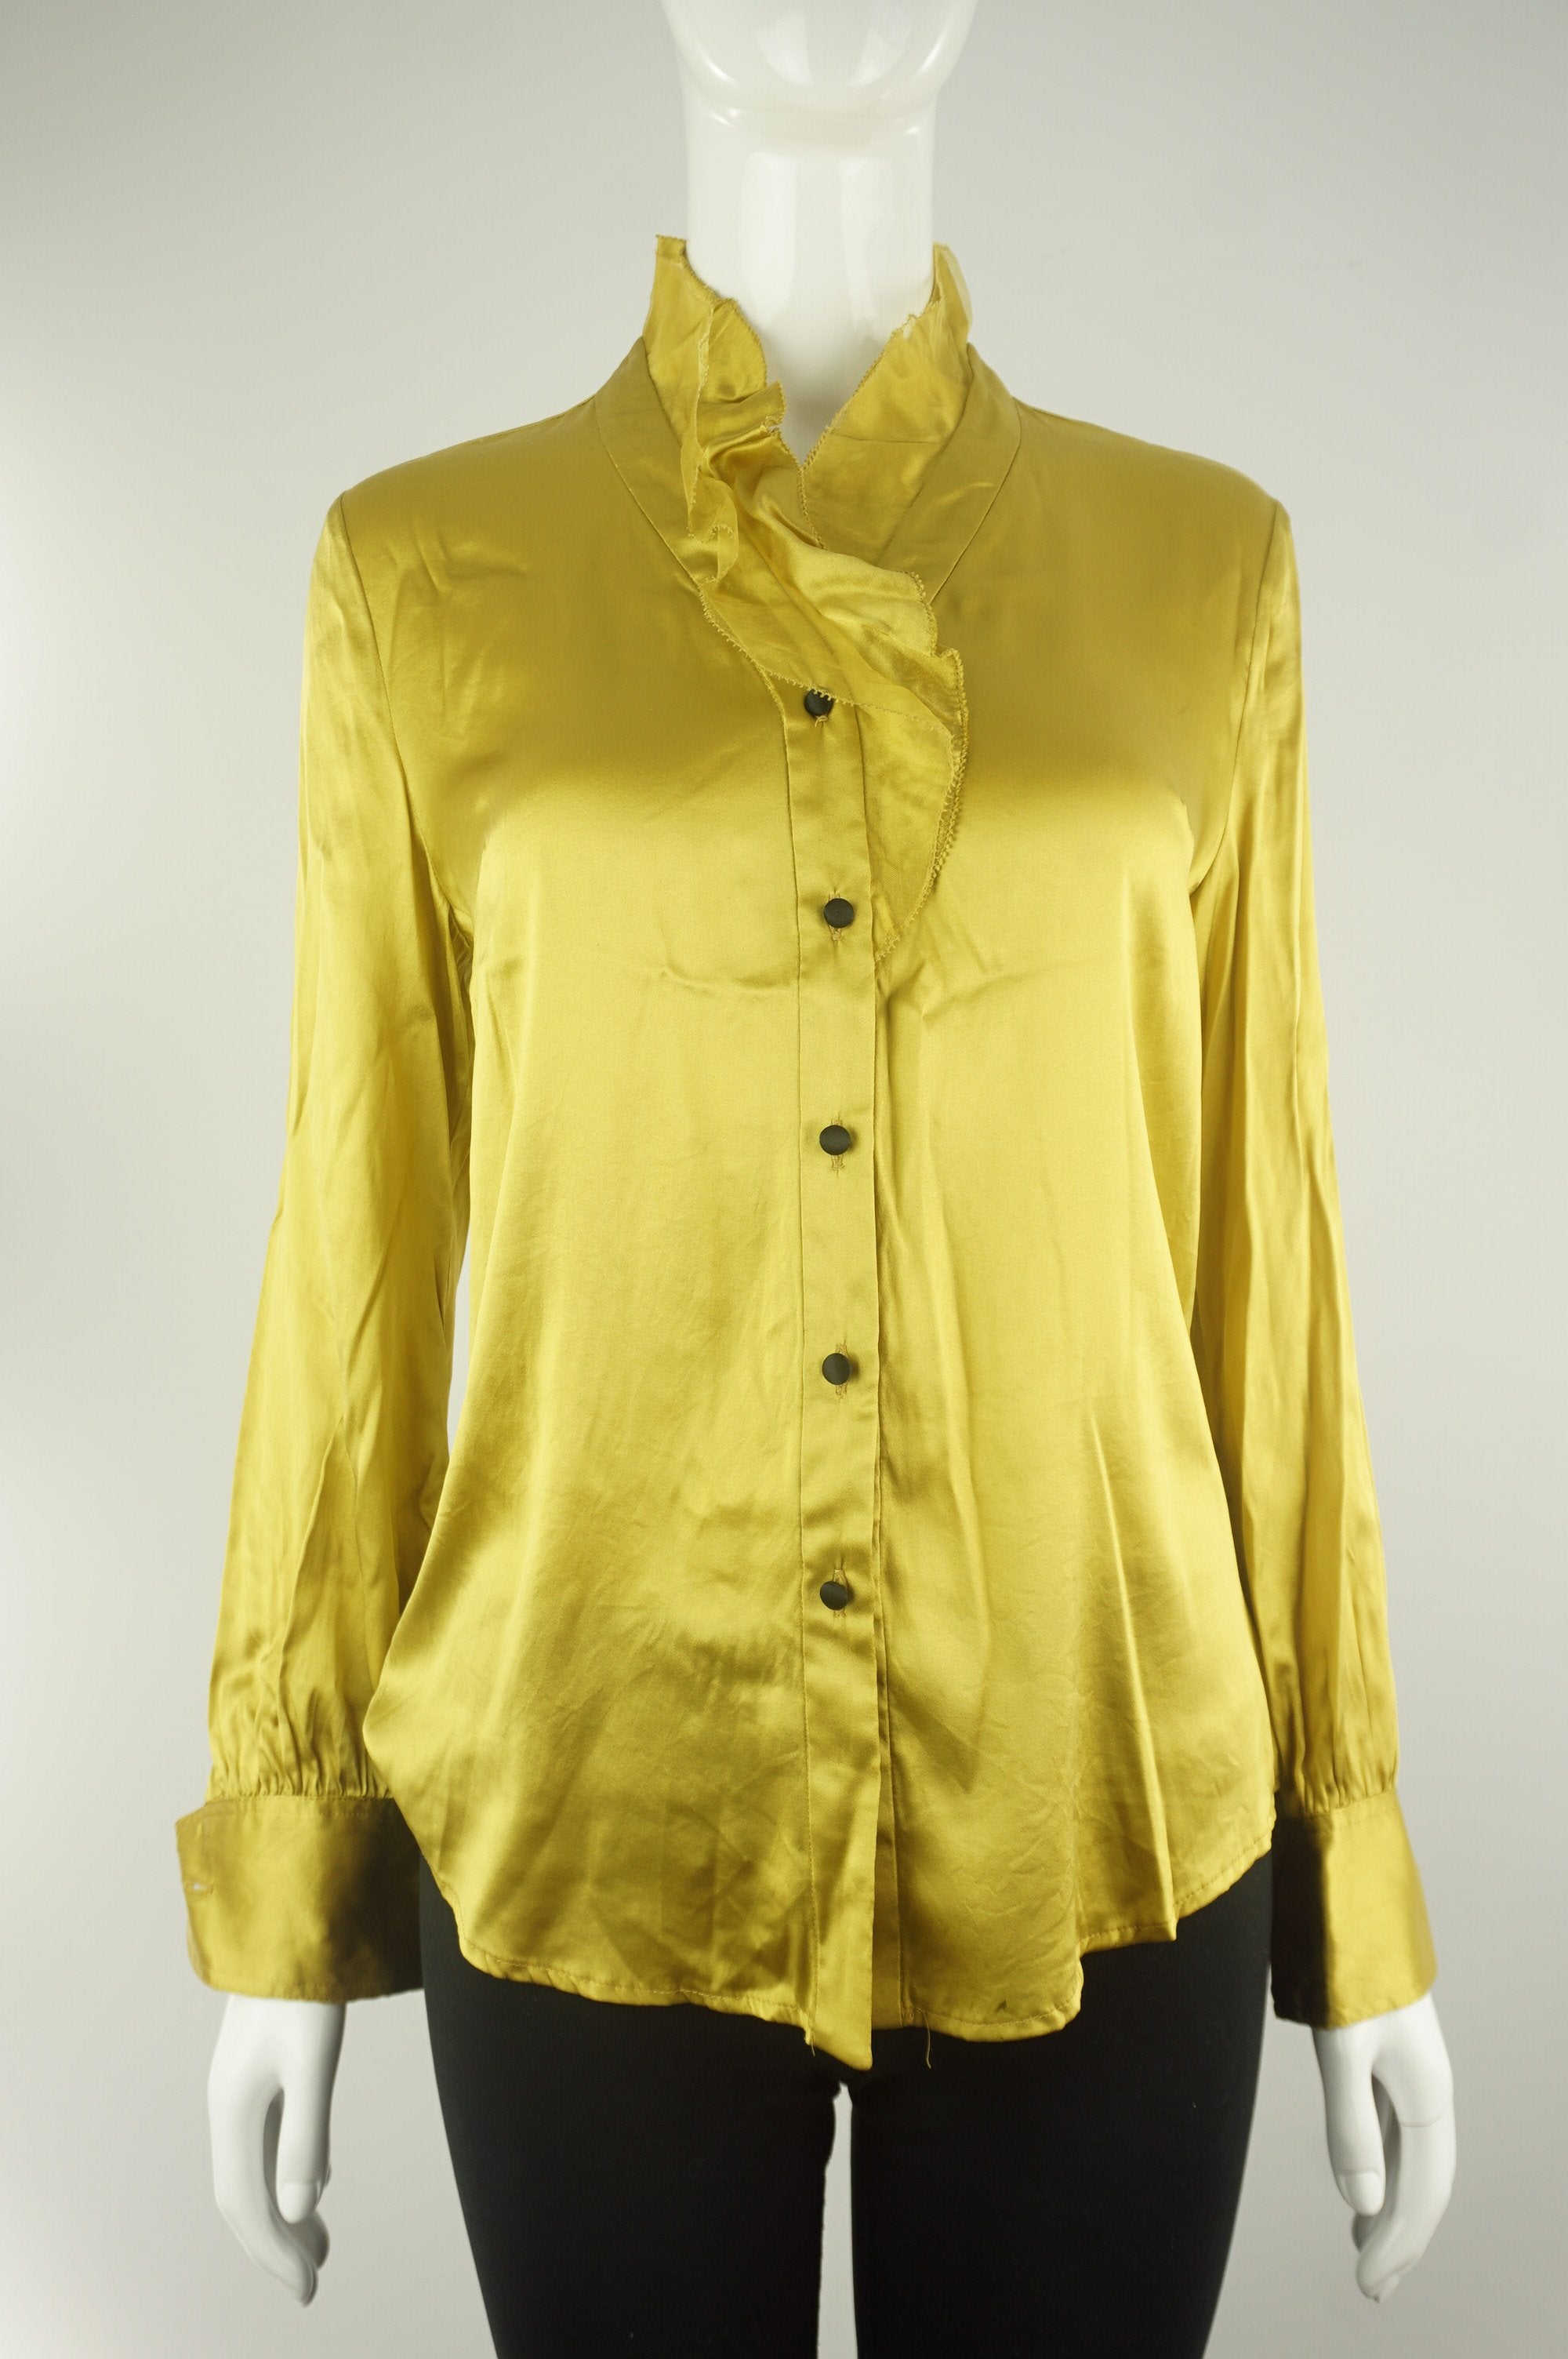 Elli Share Pure Silk Dress Shirt, Super light silk shirt with added spandex for stretchiness and comfort. Stylish on its own or with a kickass blazer.  Labeled Size M but fits Small., Yellow, 97% Silk, 3% Spandex, women's Tops, women's Yellow Tops, Elli Share women's Tops, silk work collar shirt with ruffle neck, silk professional collar shirt